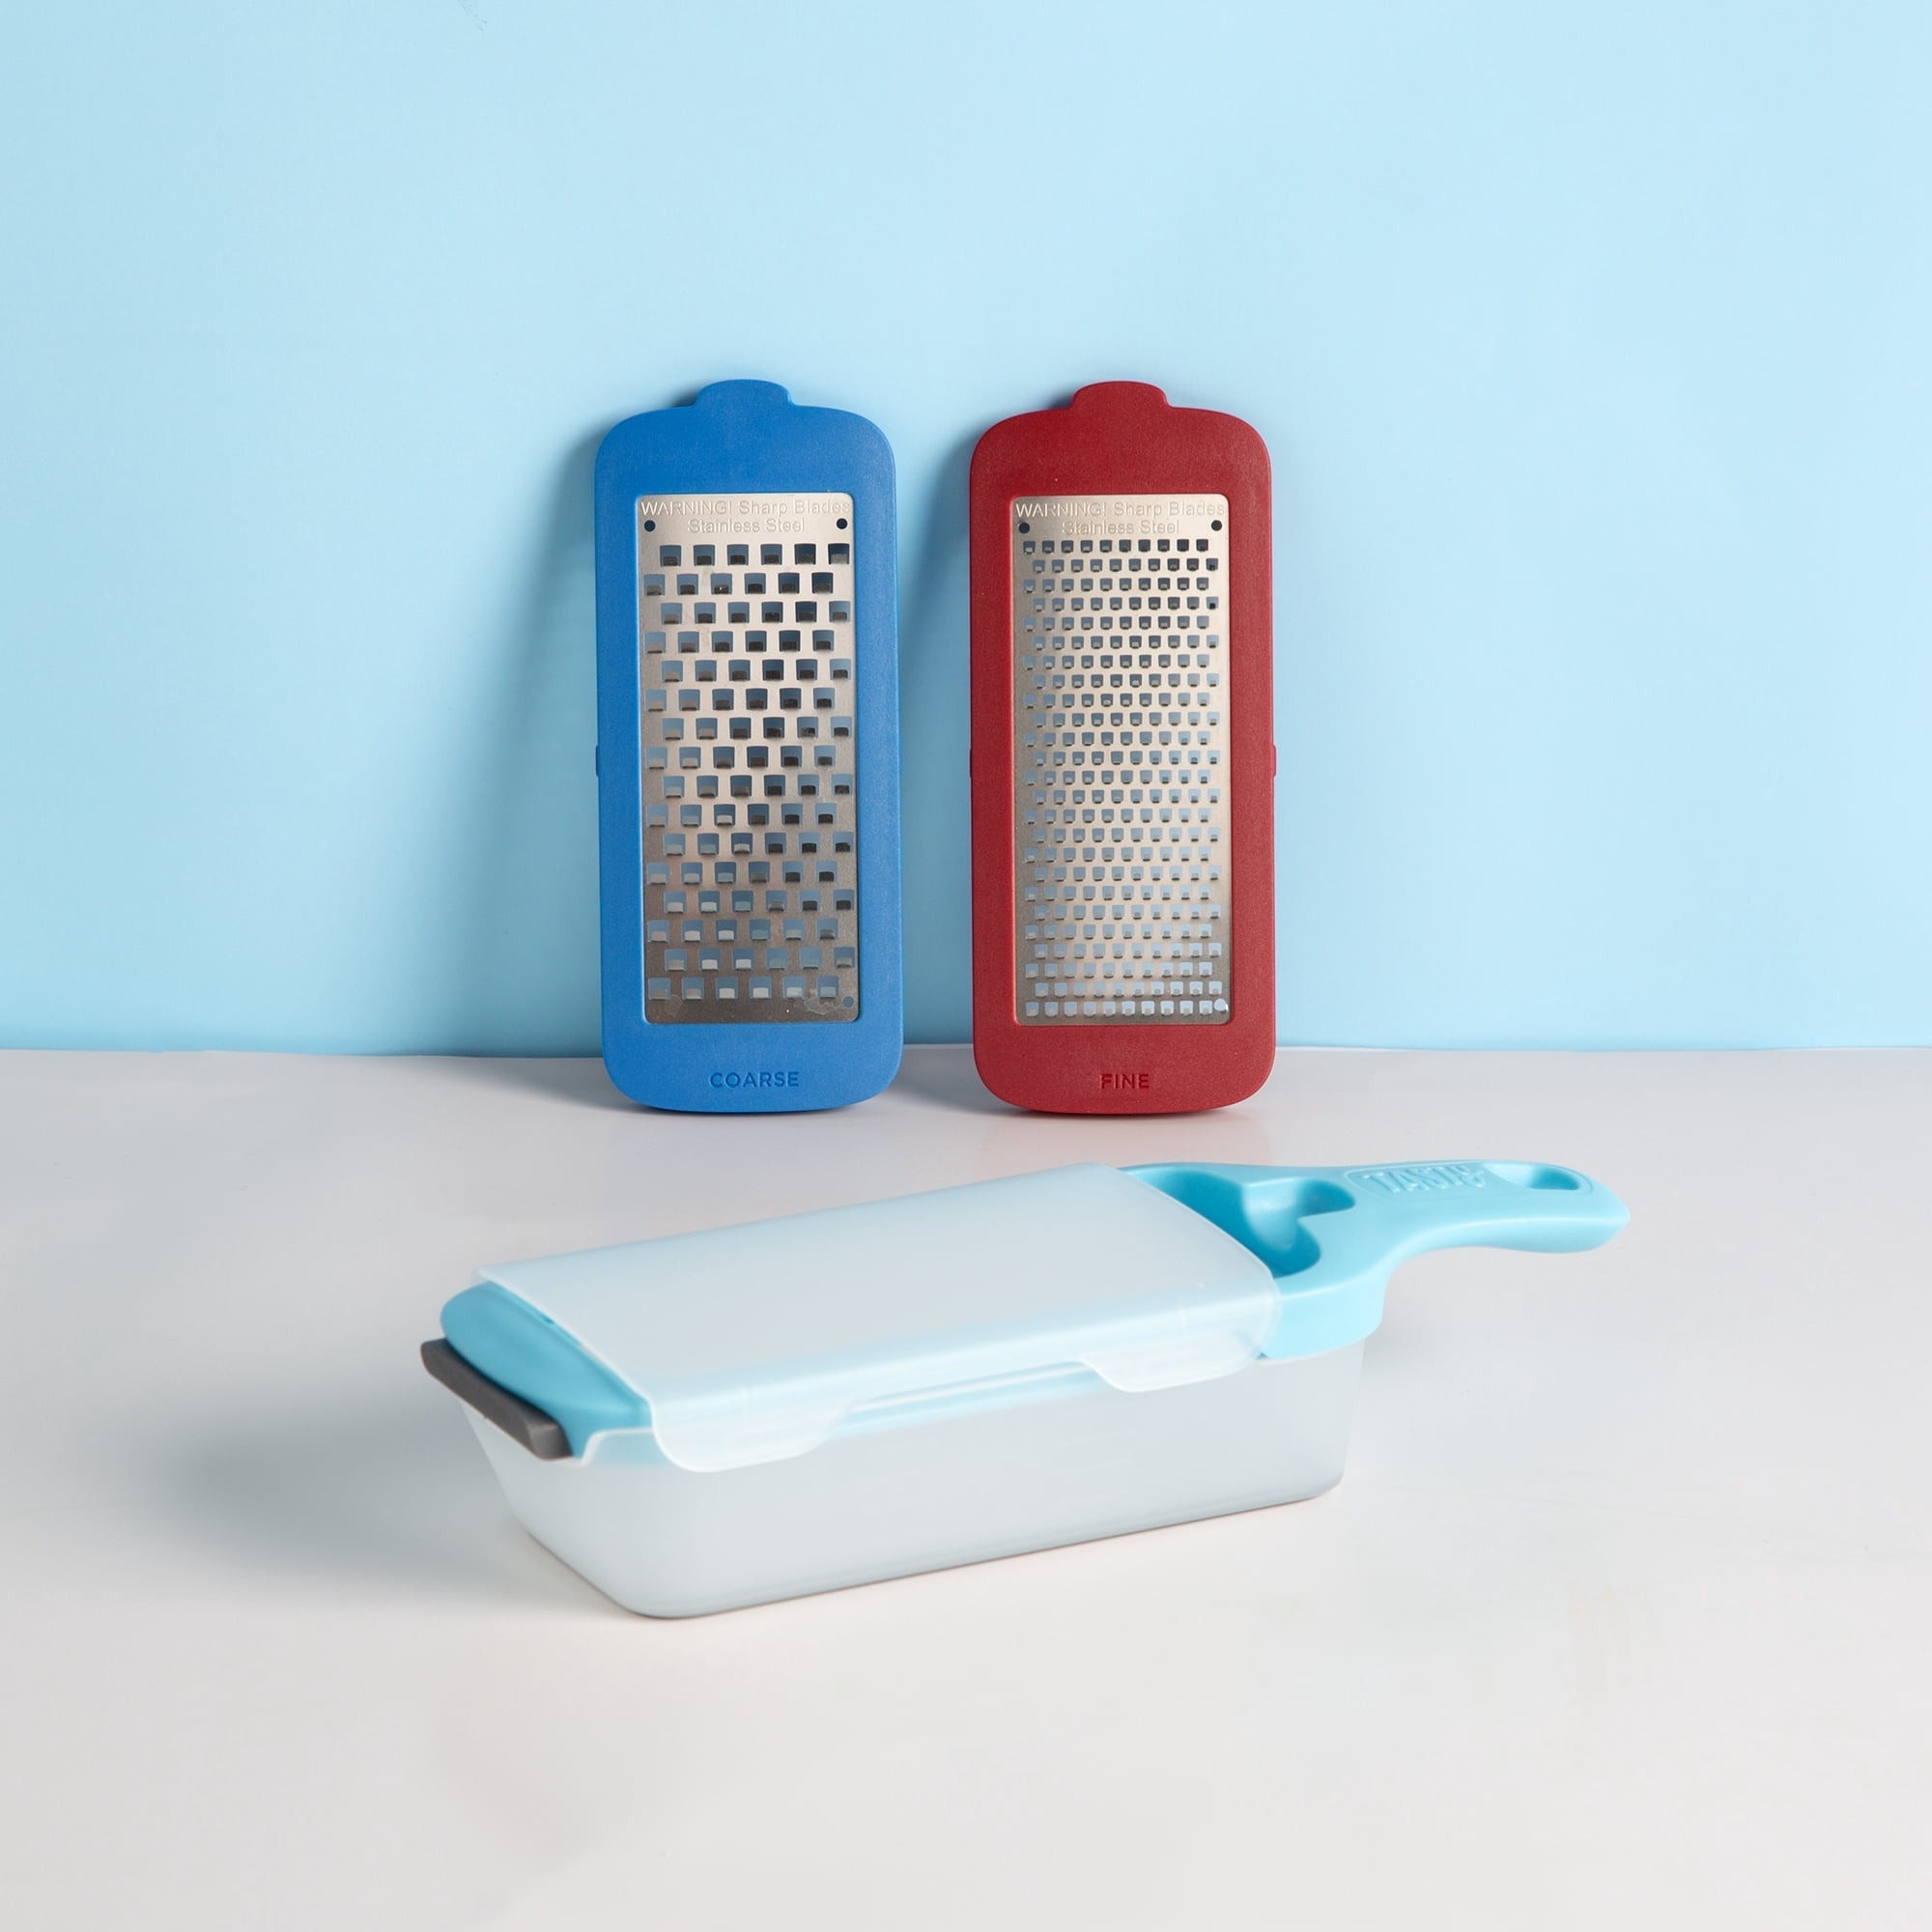 A cheese grater with two blades